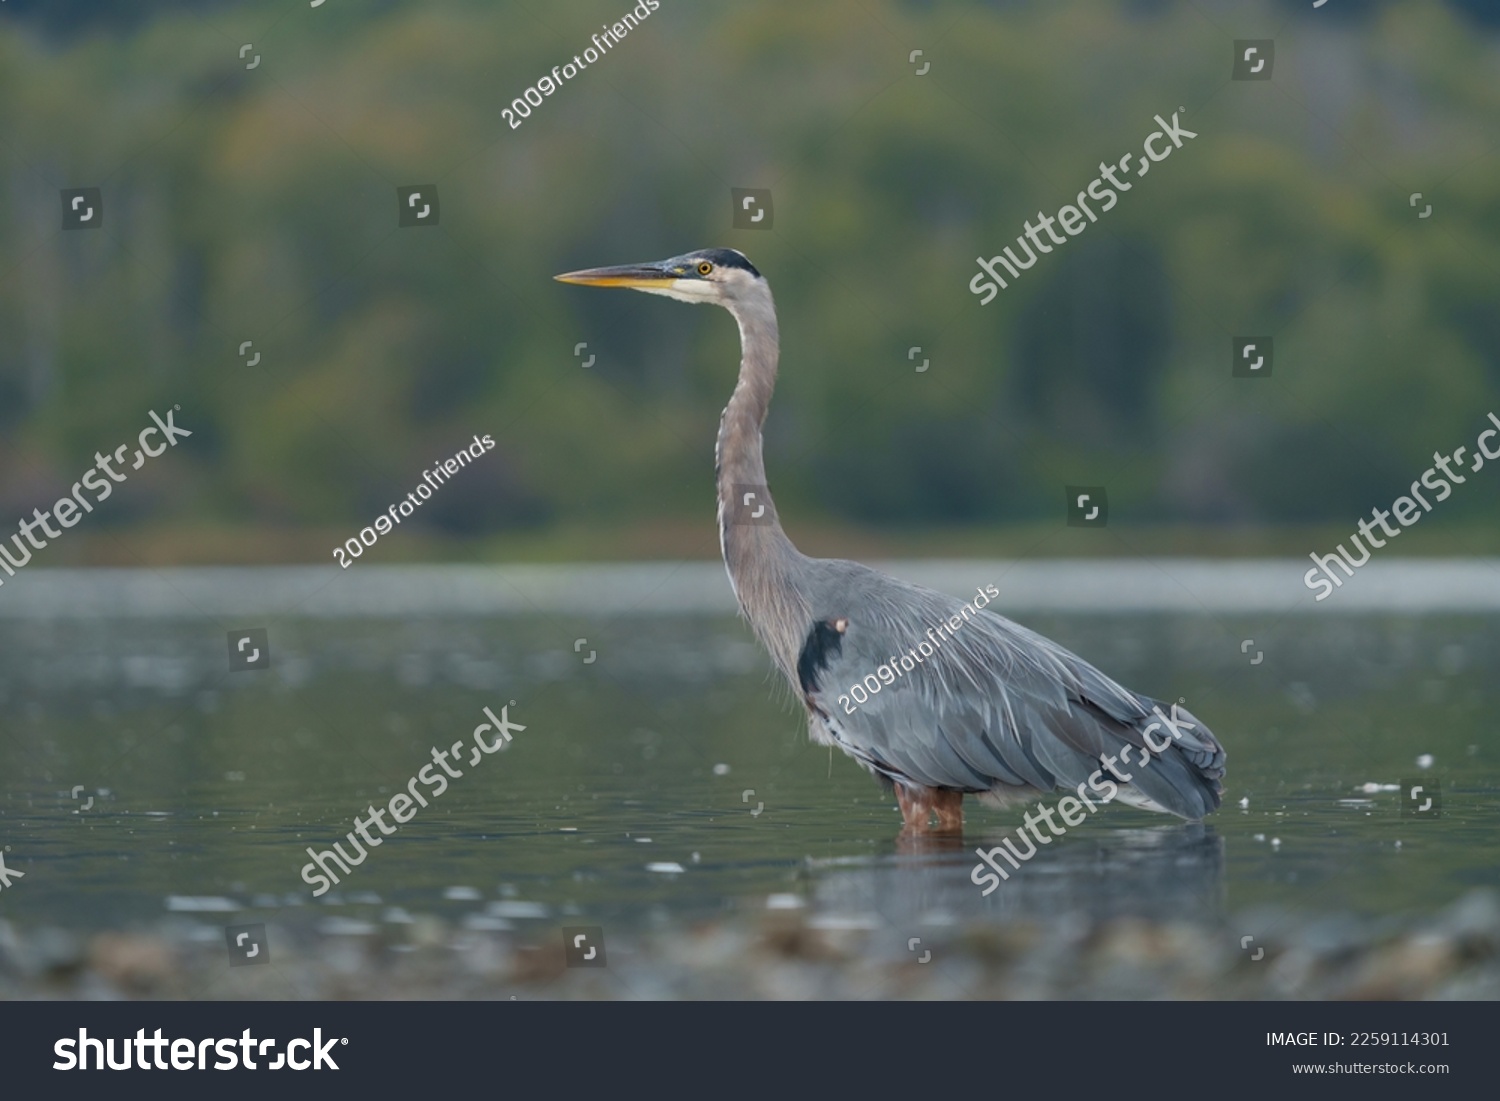 Great blue heron fishing at seaside, this is a very common waterside bird in north america. #2259114301